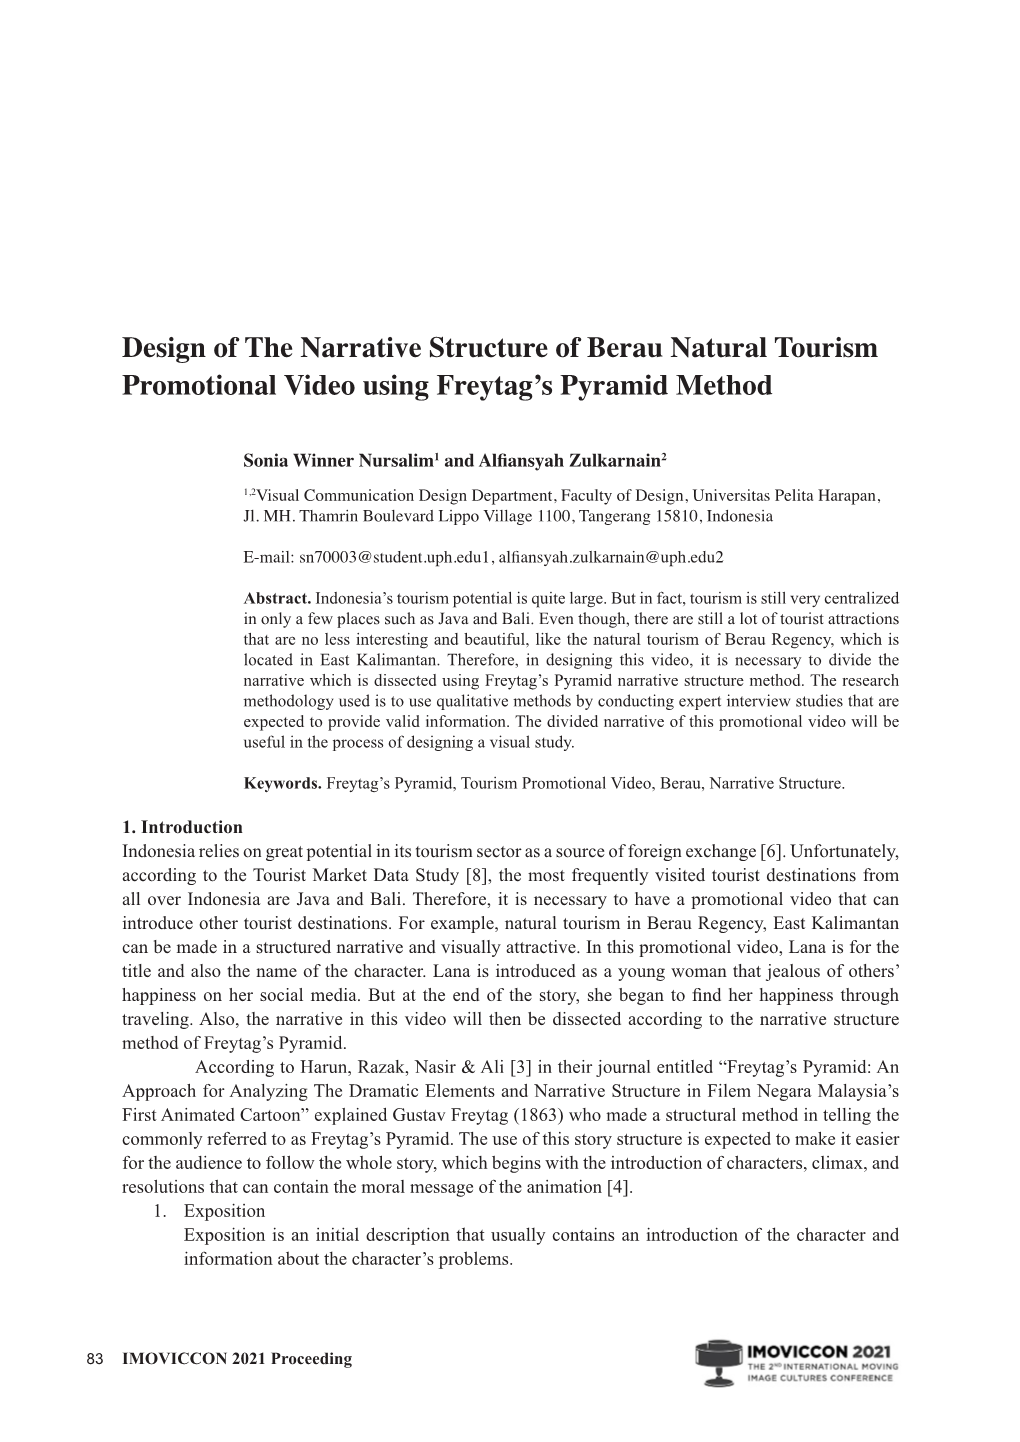 Design of the Narrative Structure of Berau Natural Tourism Promotional Video Using Freytag’S Pyramid Method